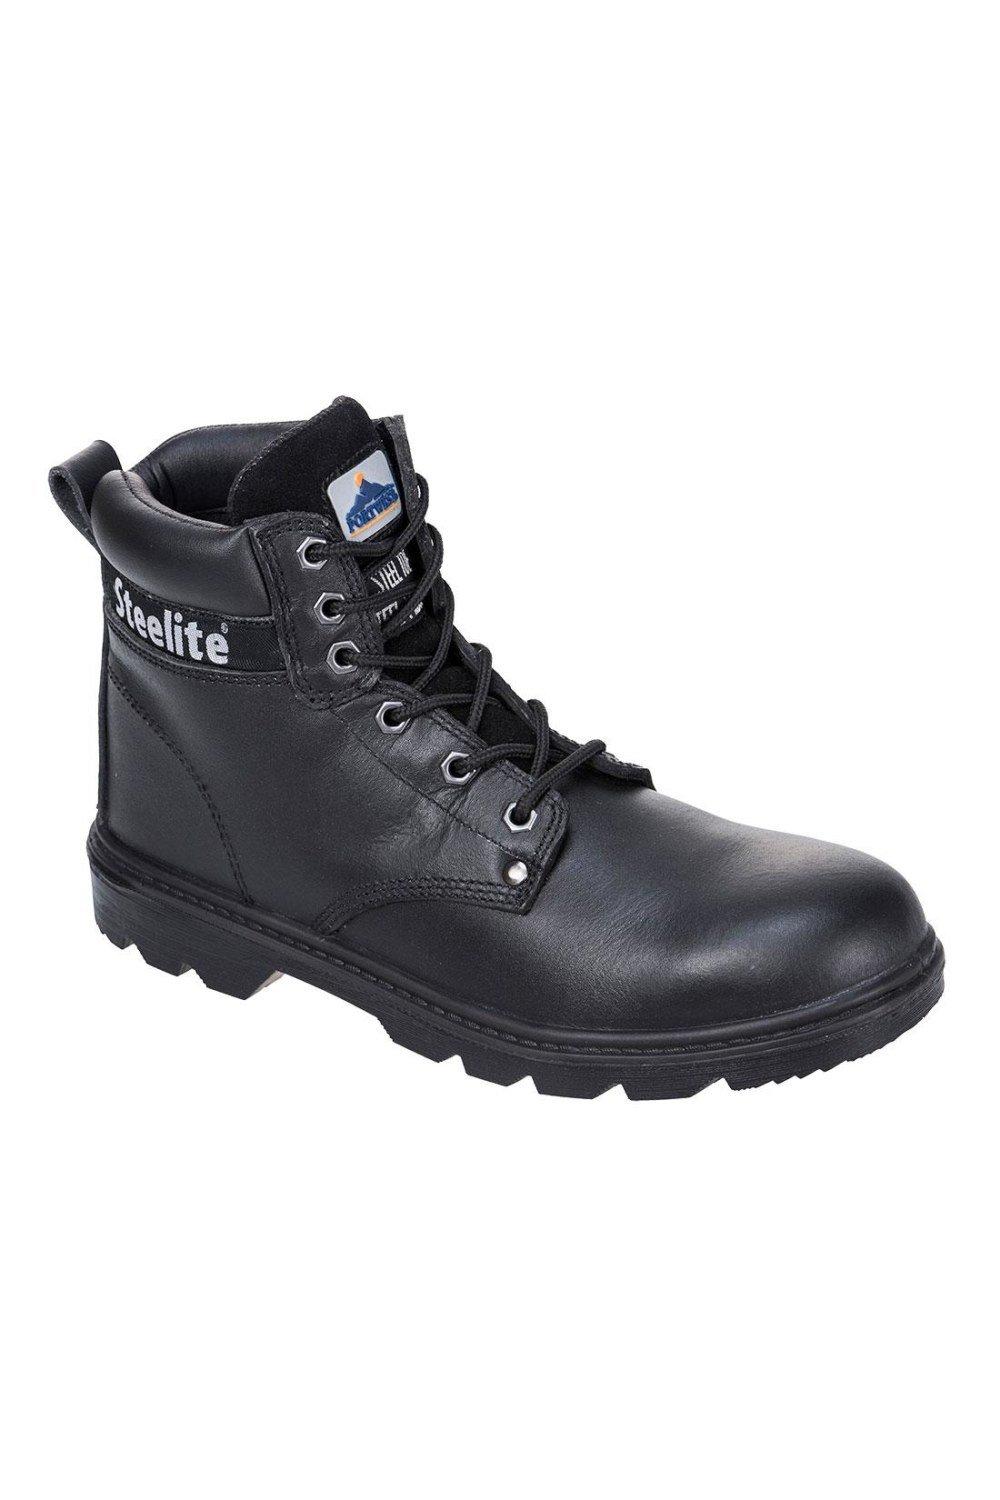 Steelite Thor Leather Safety Boots